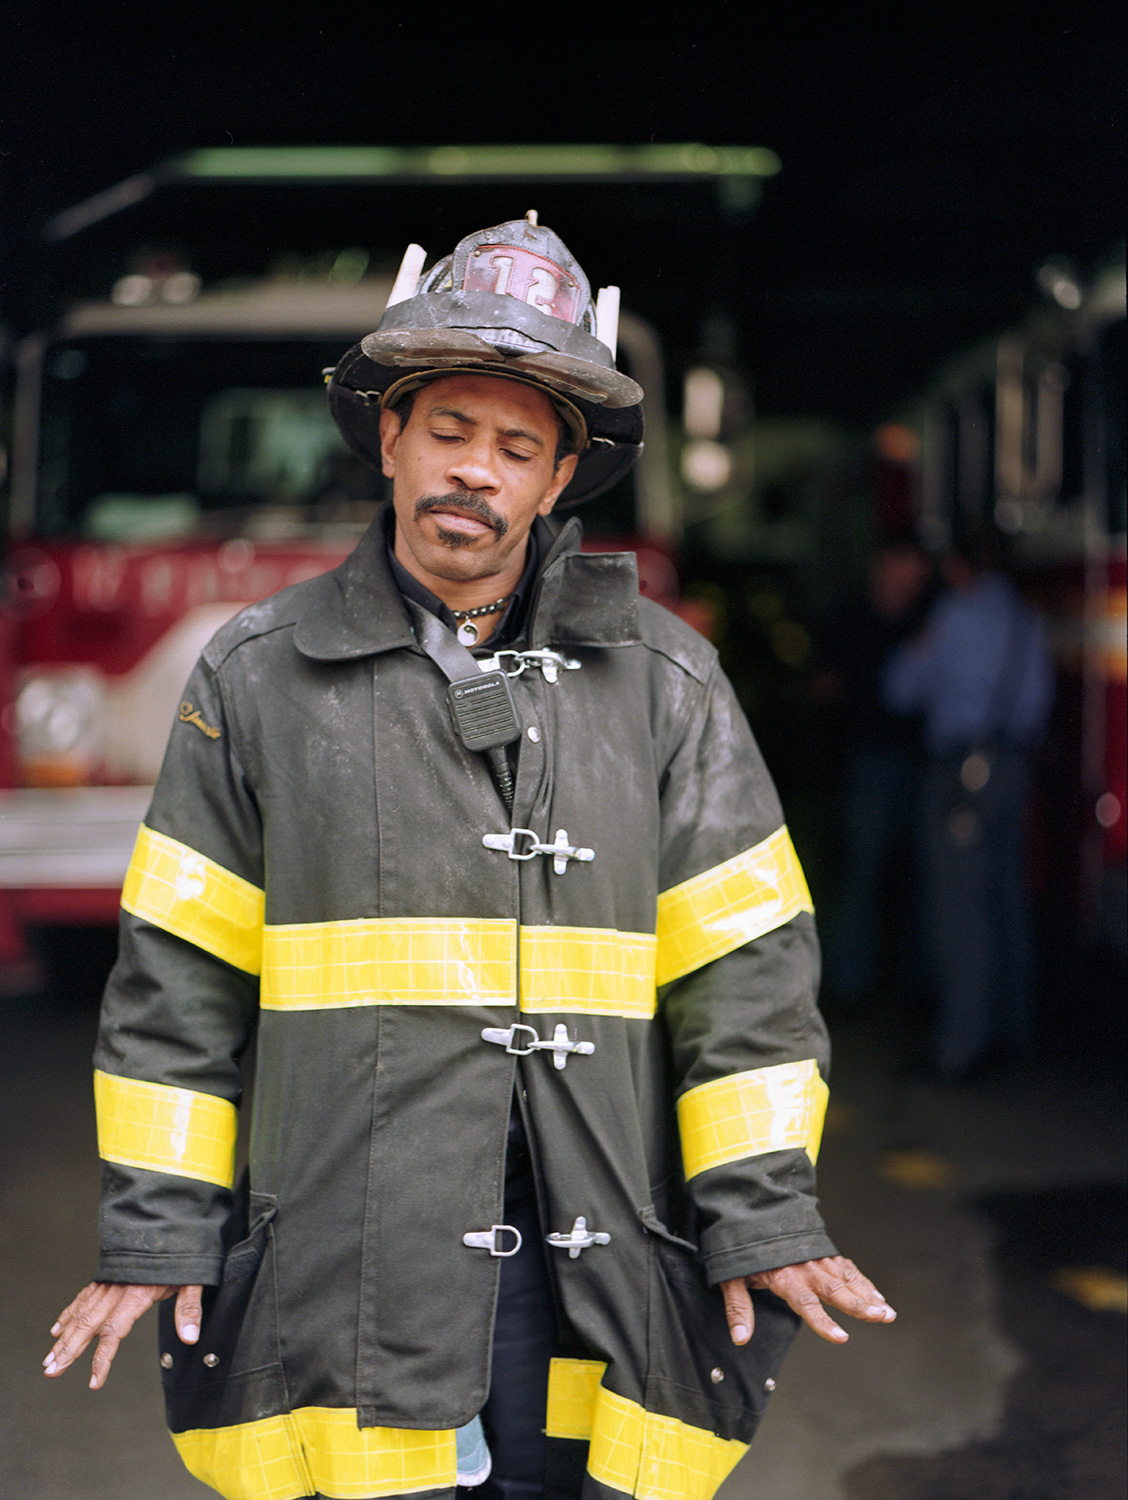  Unnamed firefighter, NYFD Ladder Company. If you had the contact sheet, you’d see he’s all teeth, gusto, and bravura in the frames before and after this one.&nbsp; But the thing is, sometimes, in spite of ourselves, the photo machine captures these 